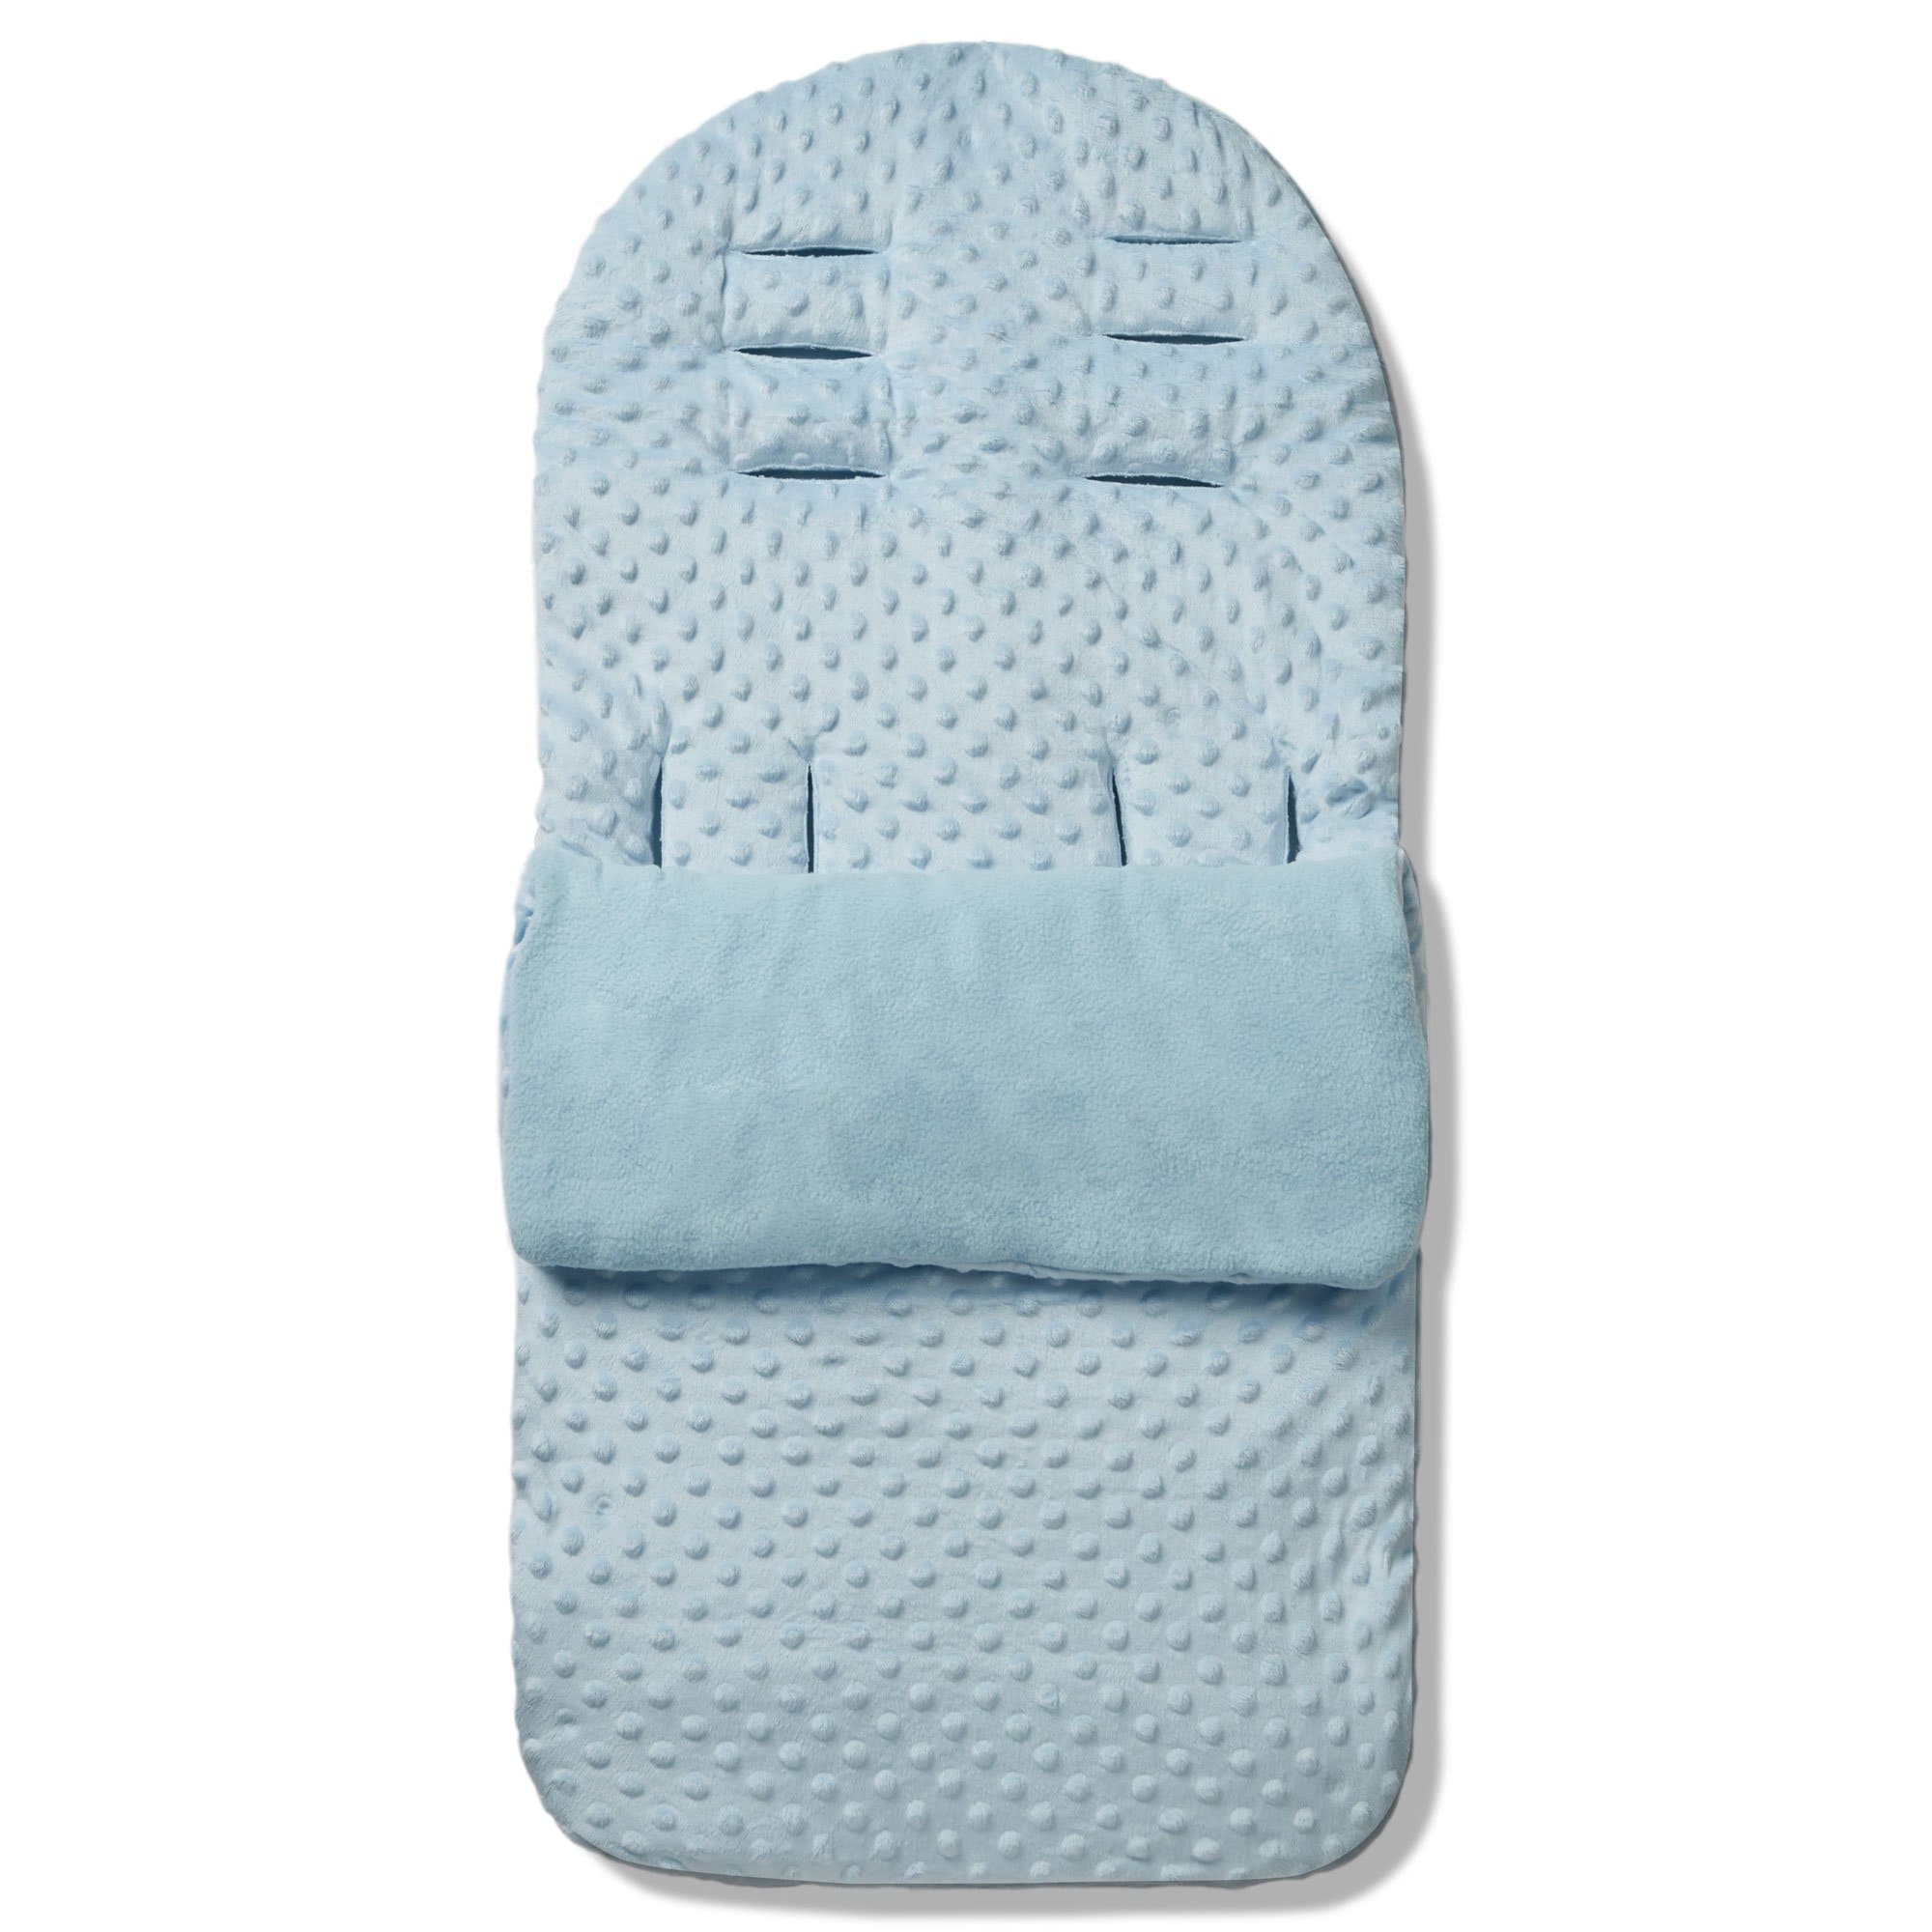 Dimple Footmuff / Cosy Toes Compatible with Uppababy - Blue / Fits All Models | For Your Little One